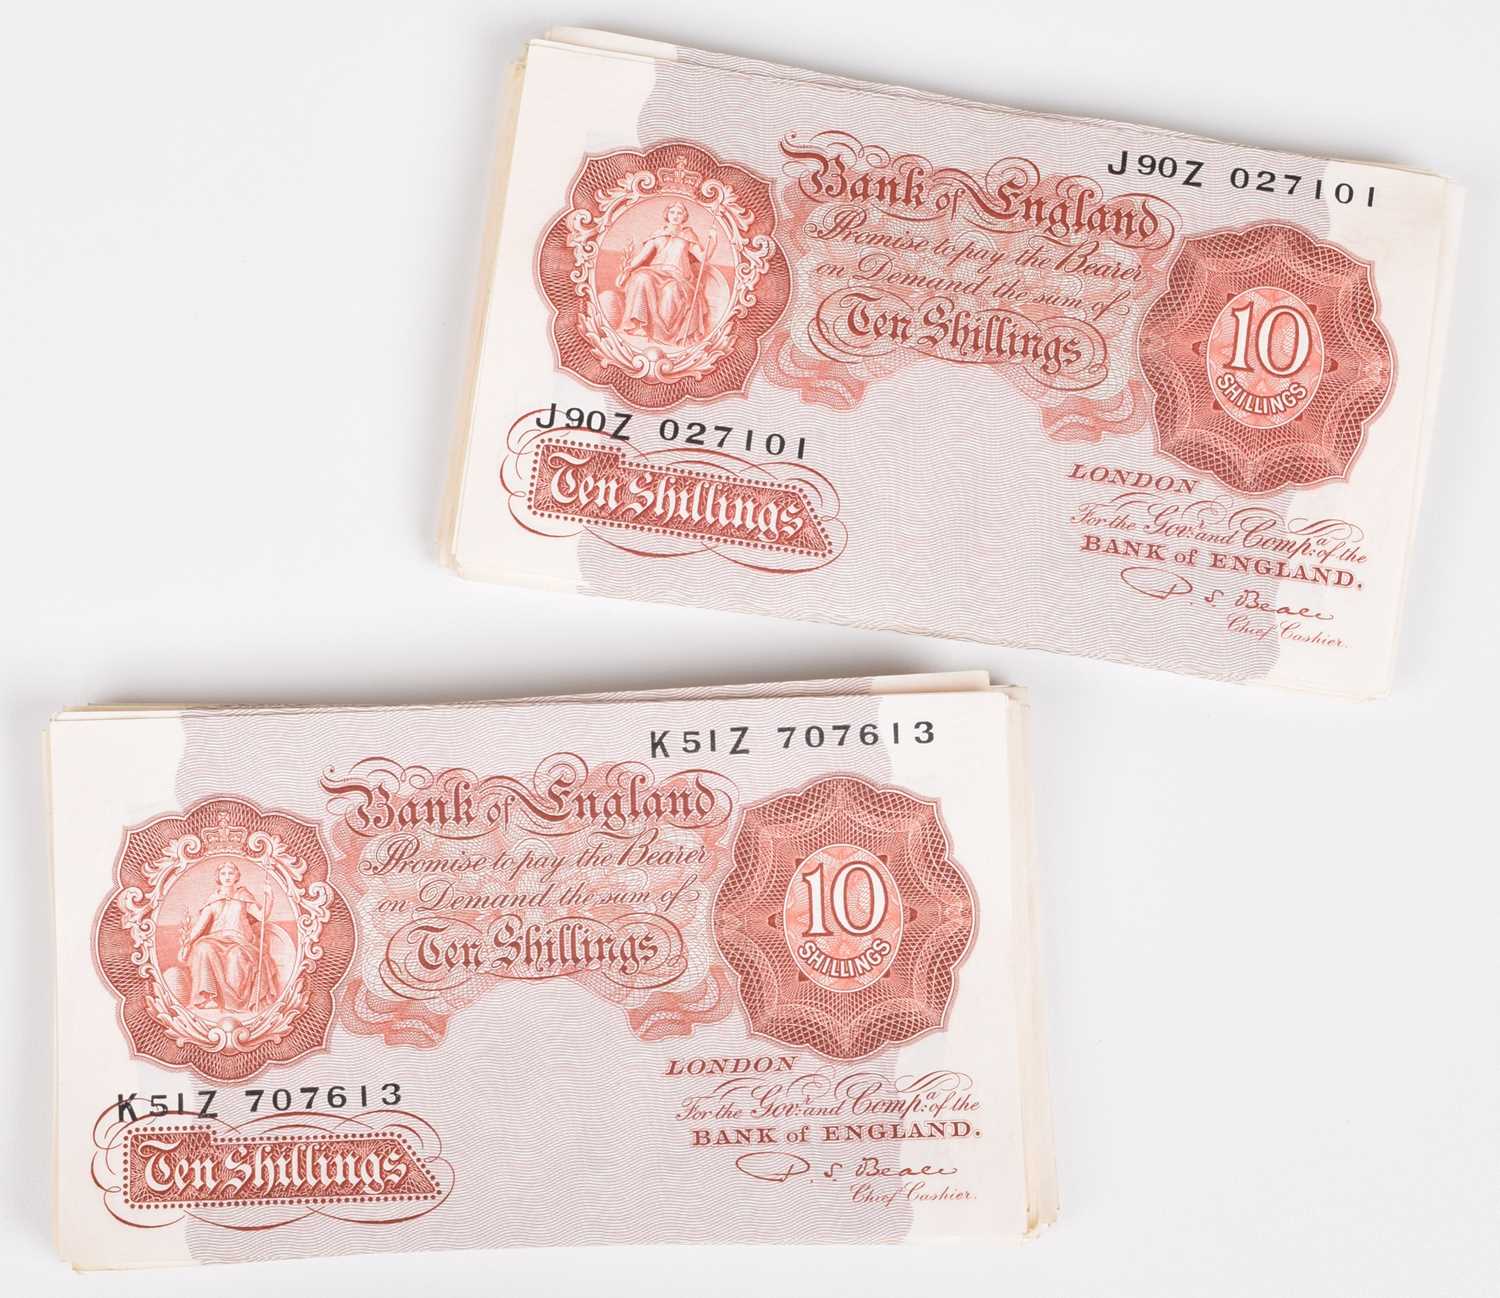 Sixty-eight Ten Shillings banknotes, Series "A" Britannia Issue (68).